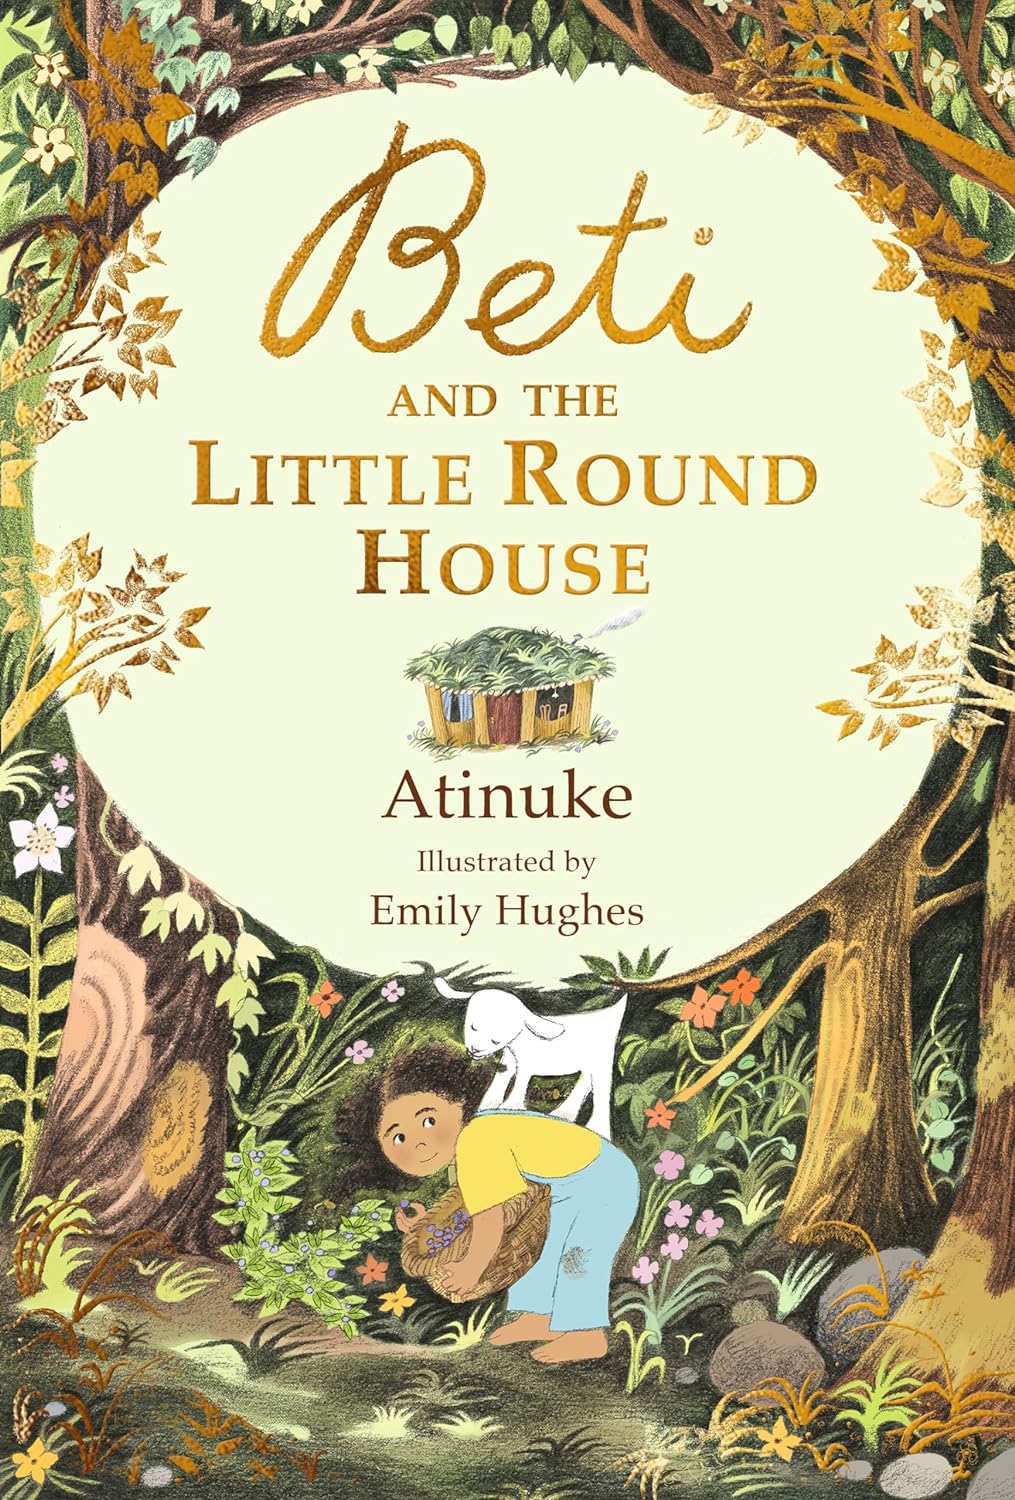 Atinuke: Beti and the Little Round House, illustrated by Emily Hughes